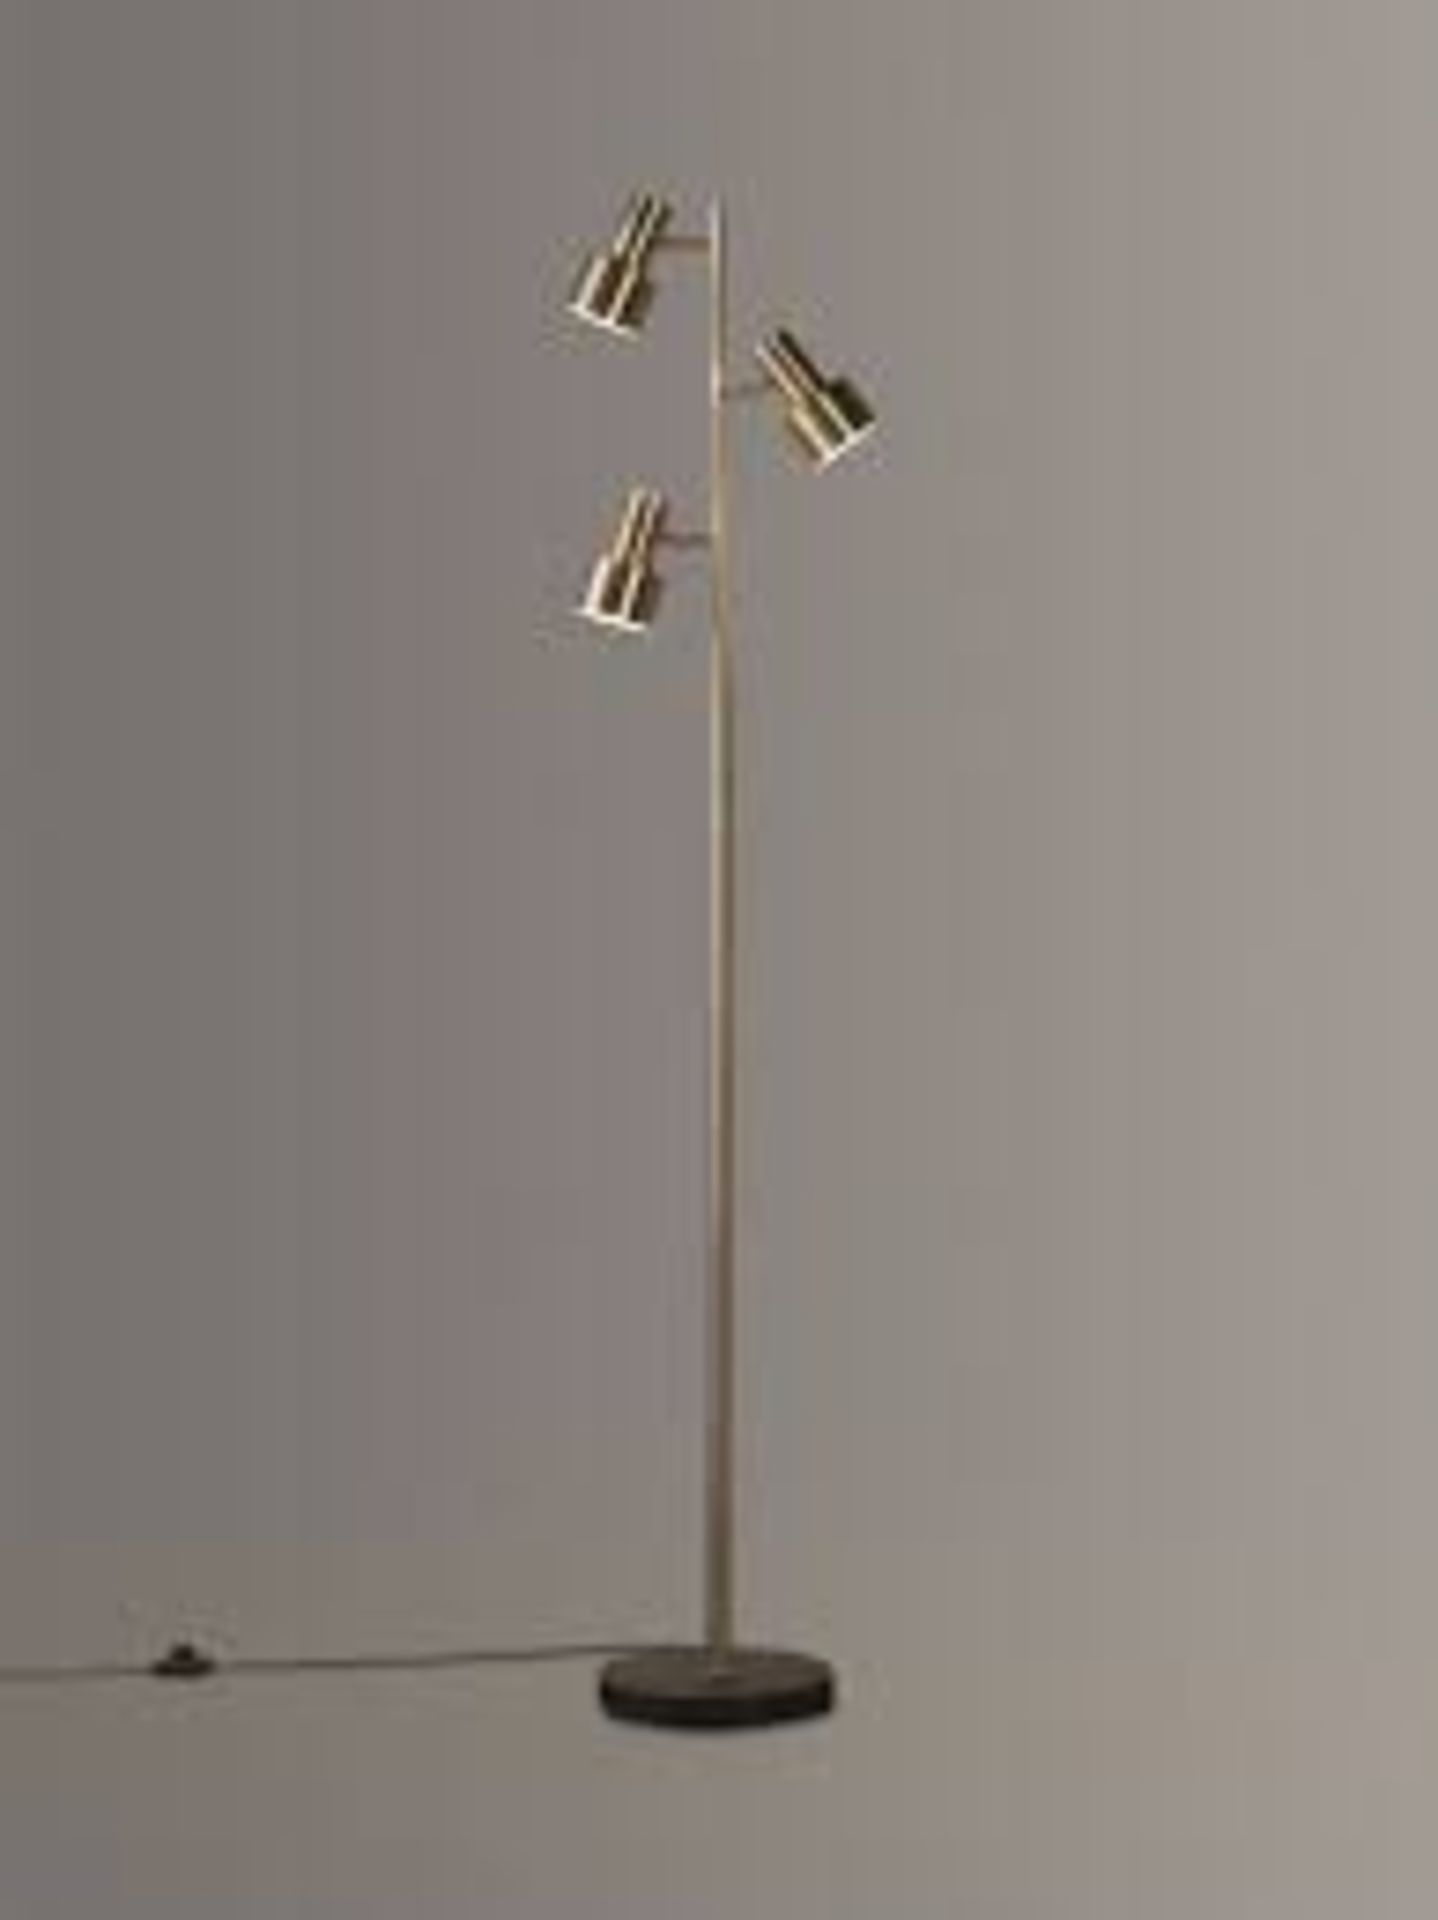 Boxed John Lewis and Partners Shelby Antique Brass 3 Light LED Floor Lamp RRP £215 (2362087) (Public